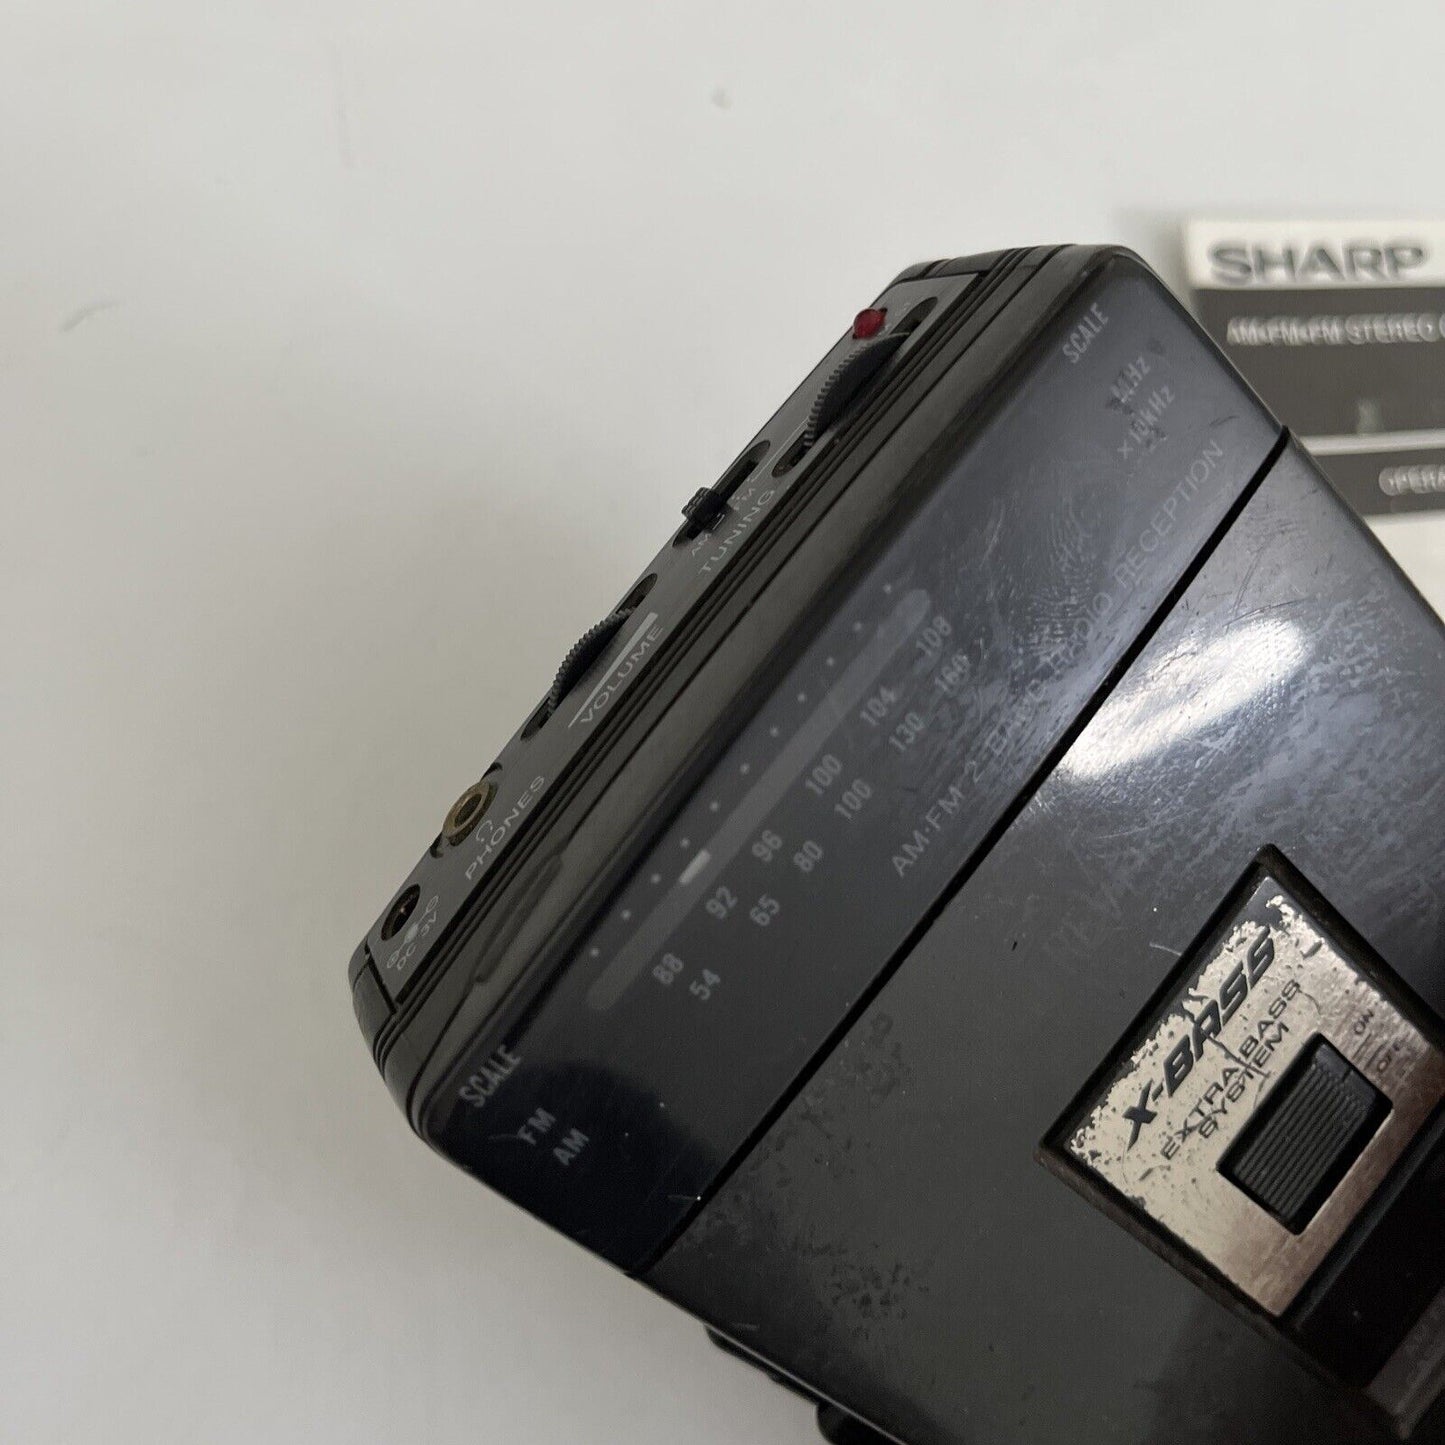 Sharp AM/FM Stereo Portable Cassette Player JC-510 with Manual